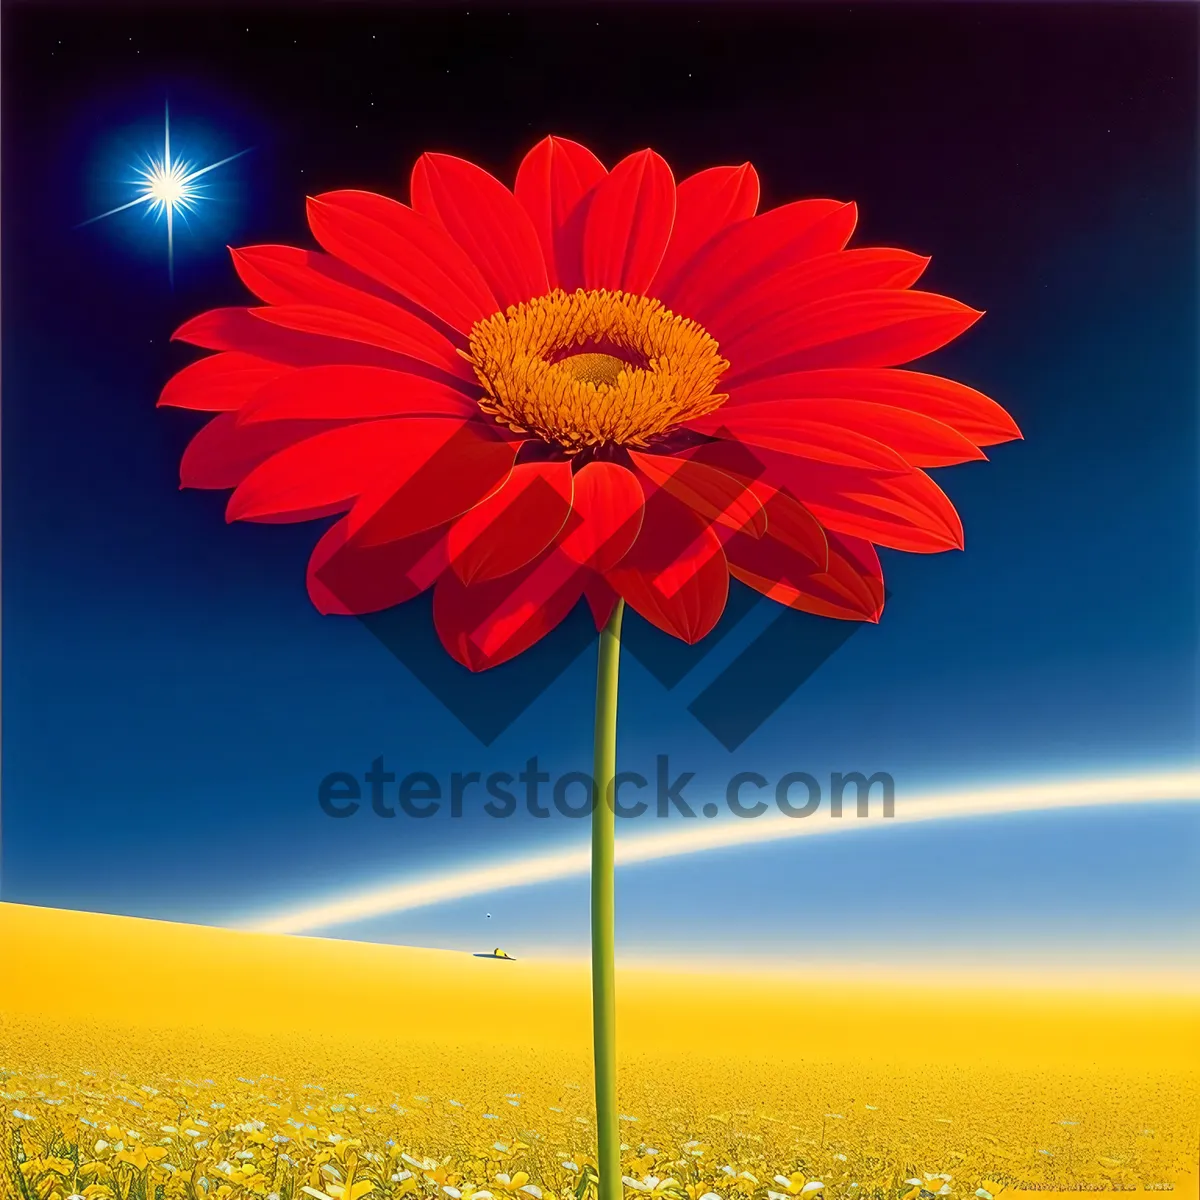 Picture of Vibrant Sunflower Blossom Under Bright Sunny Sky